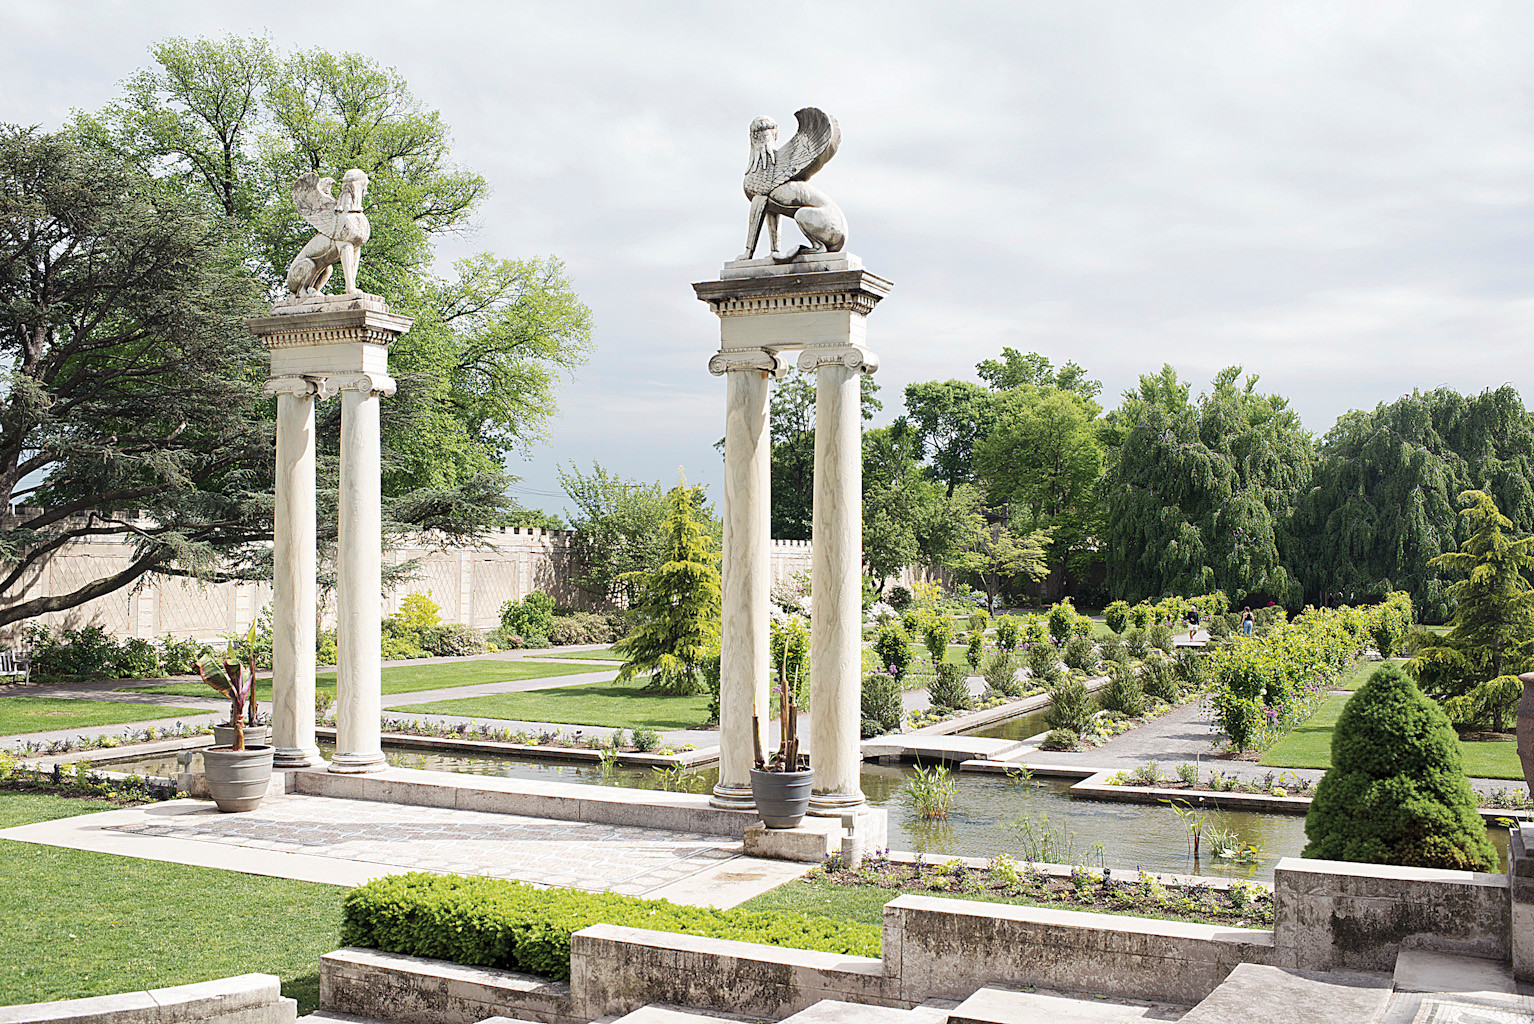 Greco-Roman columns overlook the reflecting pools in the Walled Gardens at Untermyer Park.